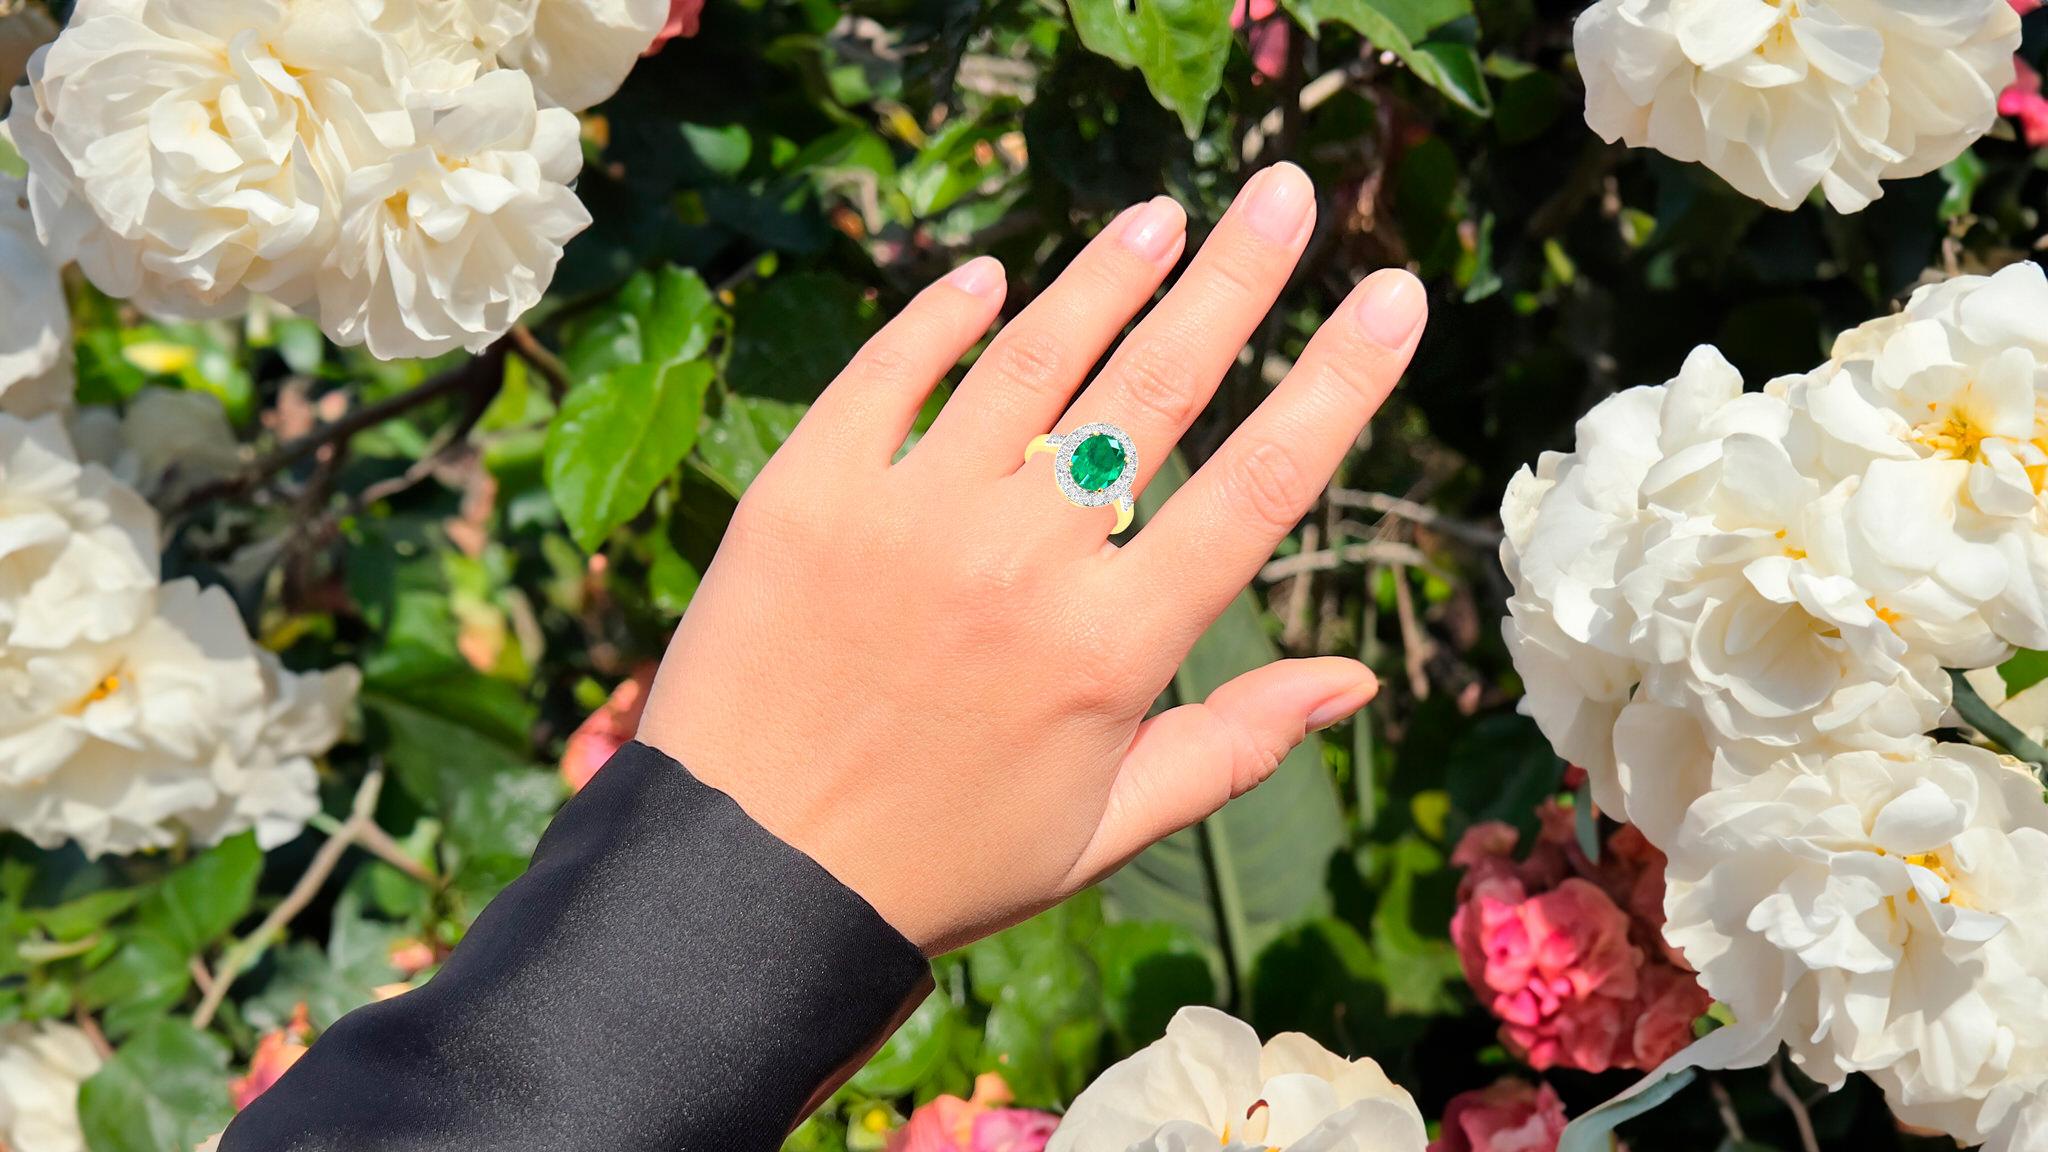 It comes with the Gemological Appraisal by GIA GG/AJP
All Gemstones are Natural
Zambian Emeralds = 2.44 Carat
20 Diamonds = 0.60 Carats
Metal: 14K Yellow Gold
Ring Size: 7* US
*It can be resized complimentary